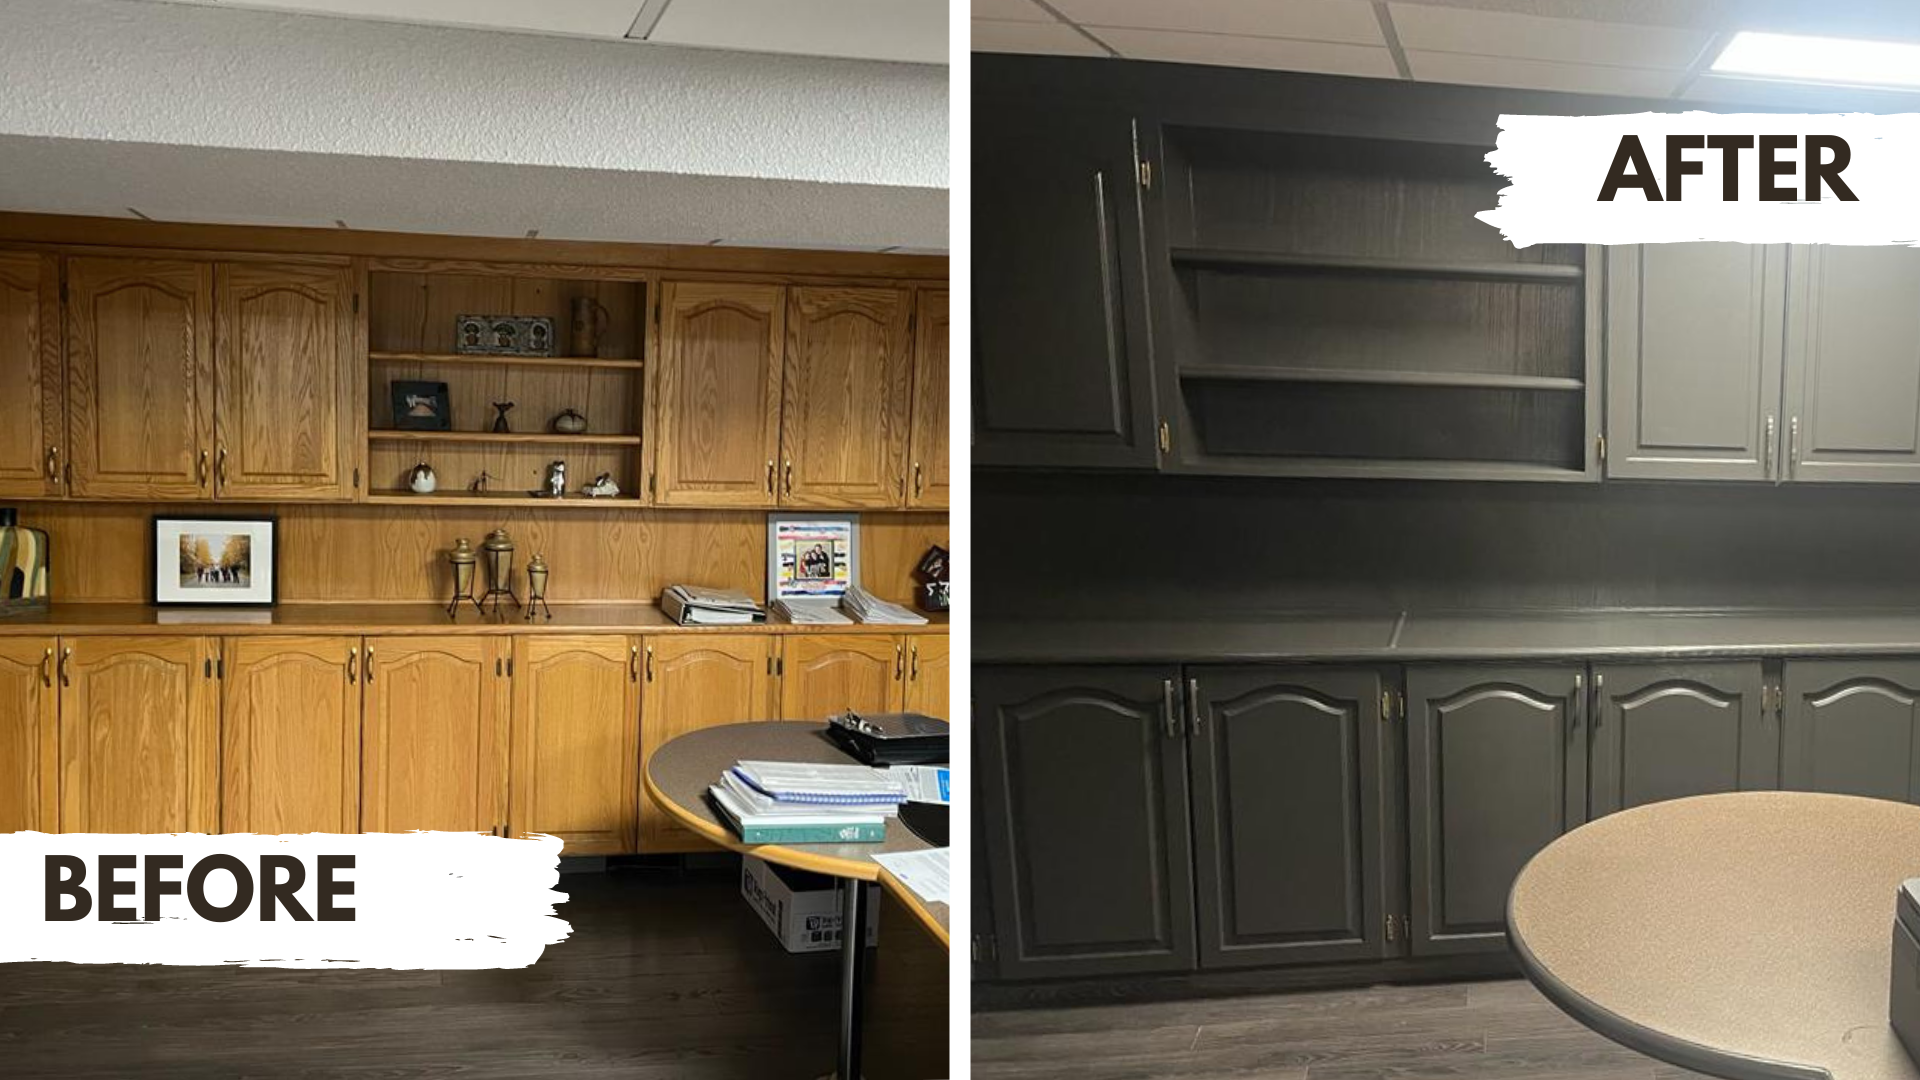 Oak cabinets before painting. Refreshed by painting dark grey to look more modern in office space.